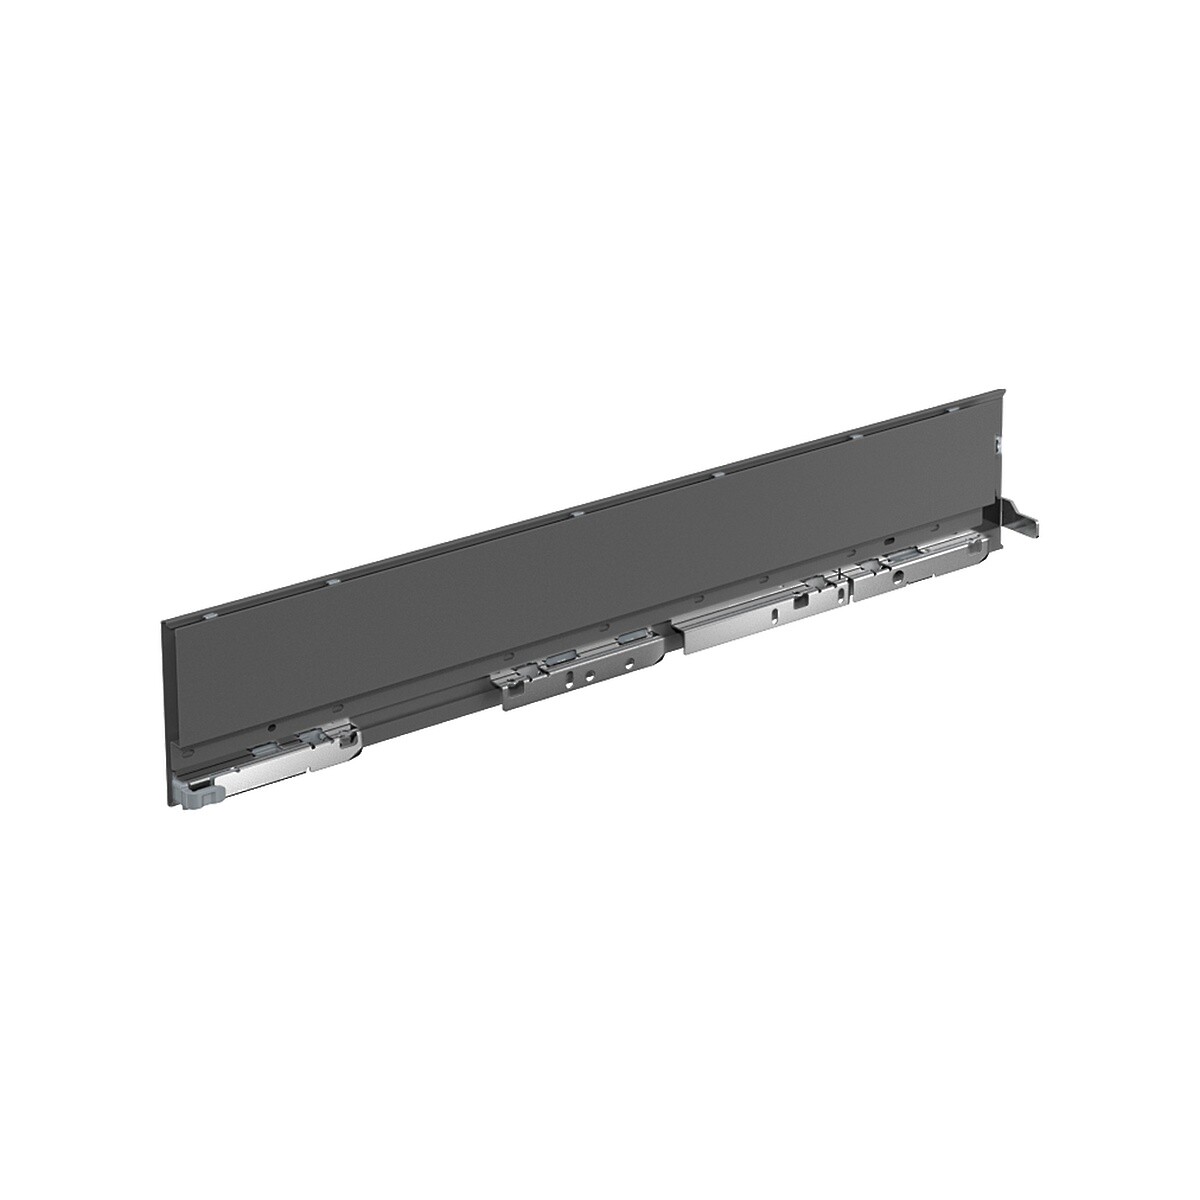 AvanTech YOU Drawer side profile, height 101 mm x NL 450 mm, Anthracite, Right